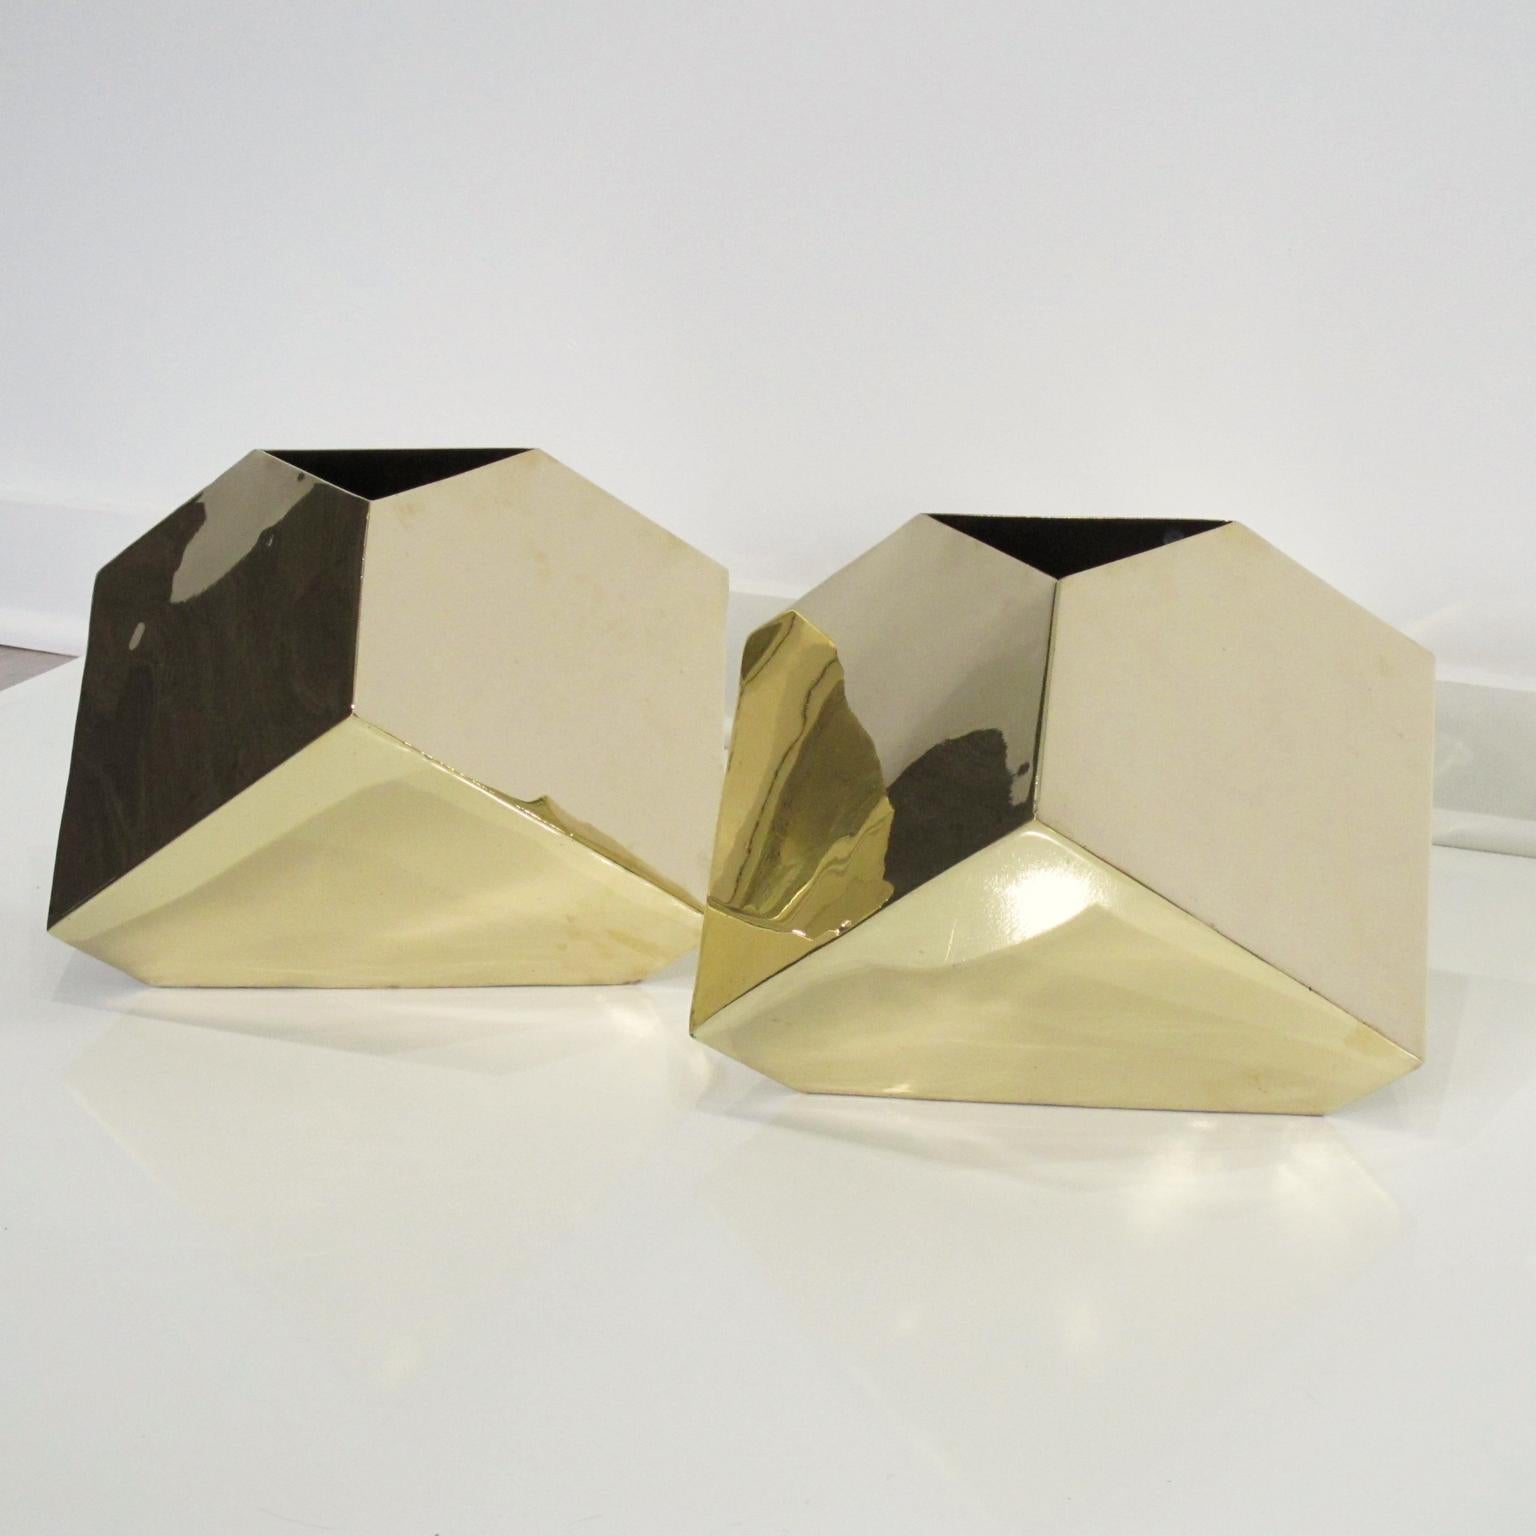 Beautiful 1980s pair of Postmodernist sleek cubist brass vases by James Johnston. High gloss polished heavily gilded brass vases with an impressive cutting edge sleek architectonic design form and small triangle opening. They can also be used as